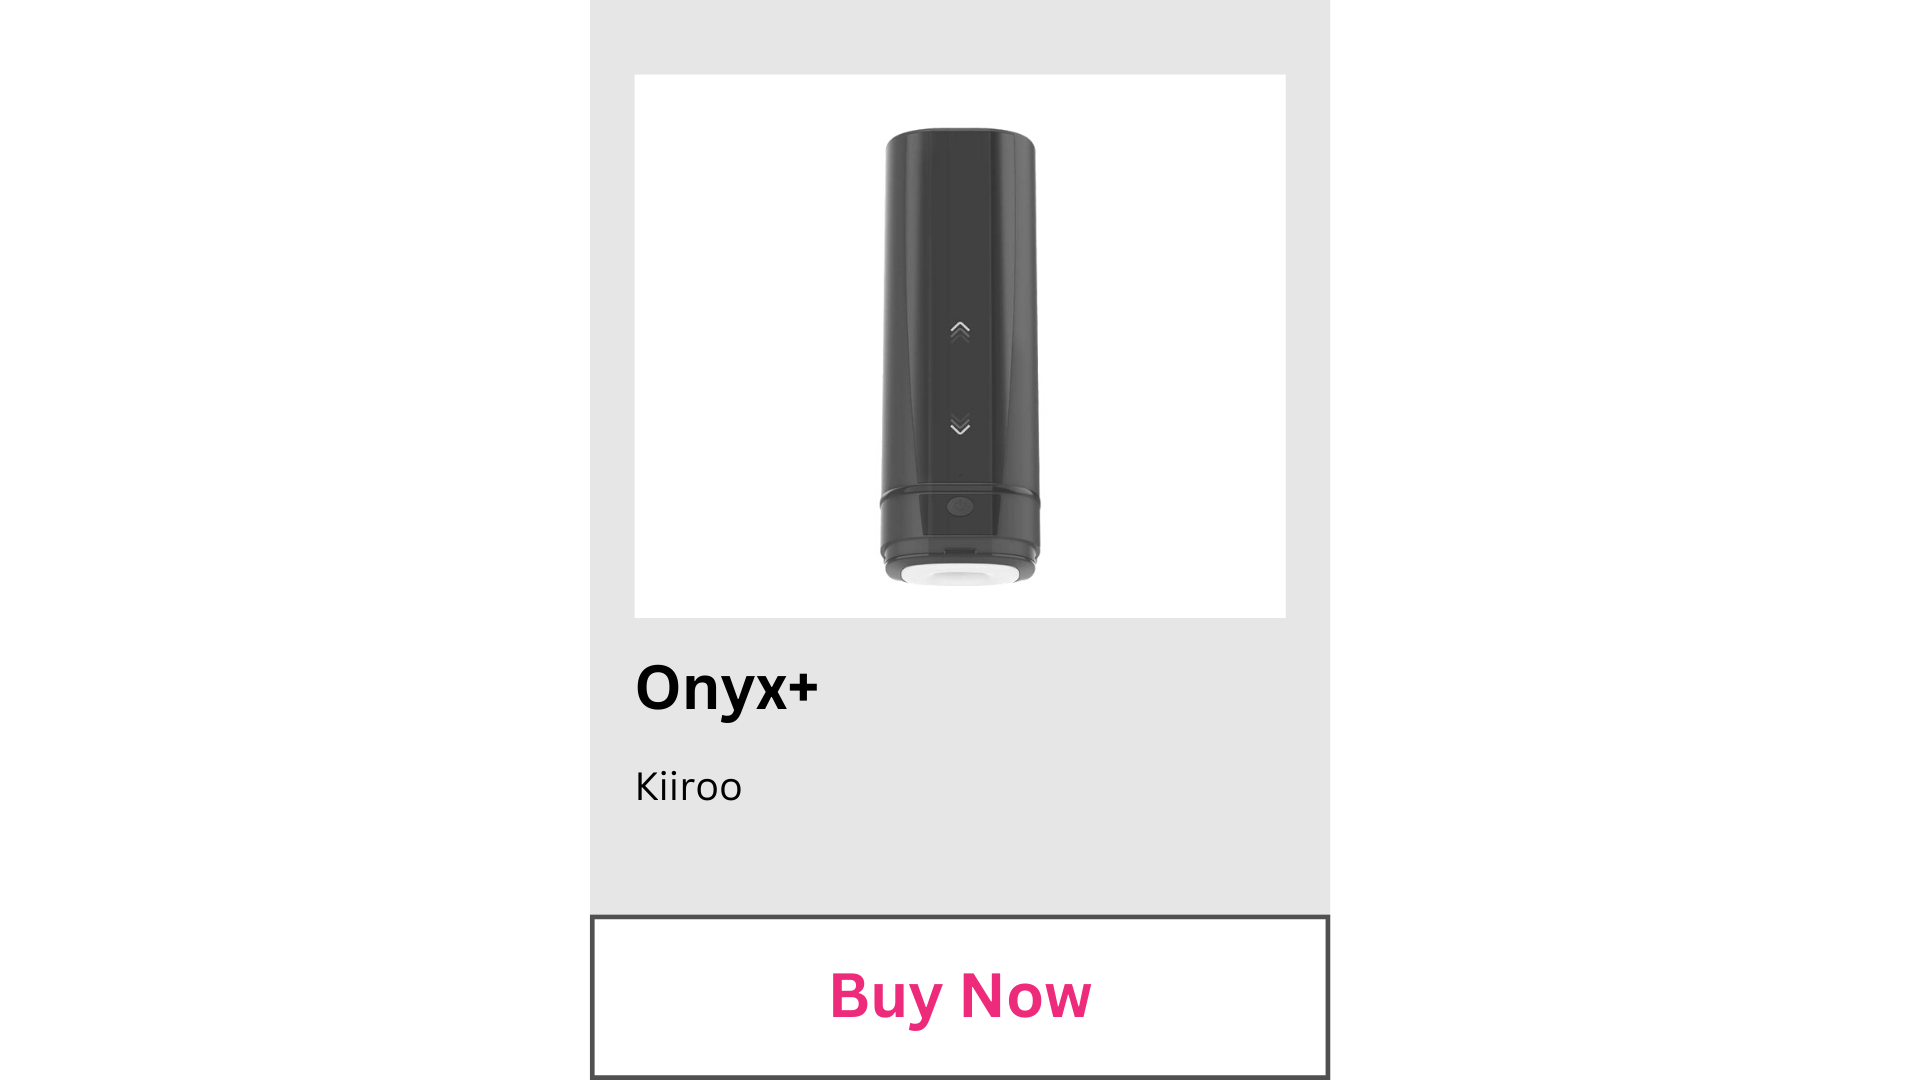 Purchase the Onyx+, men's blow job simulating sex toy.